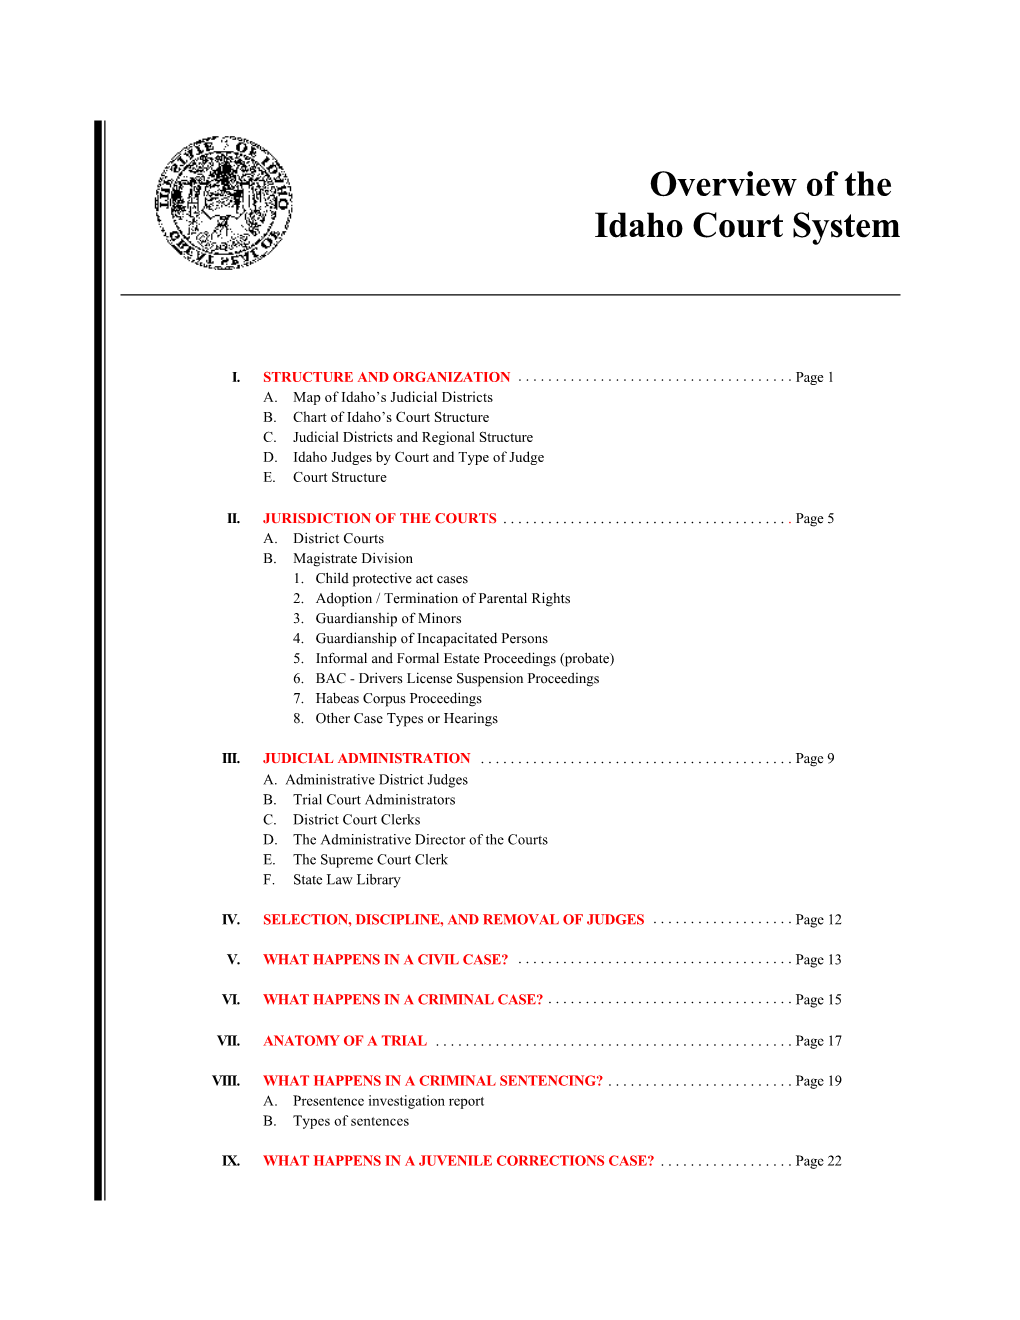 Overview of the Idaho Court System DocsLib